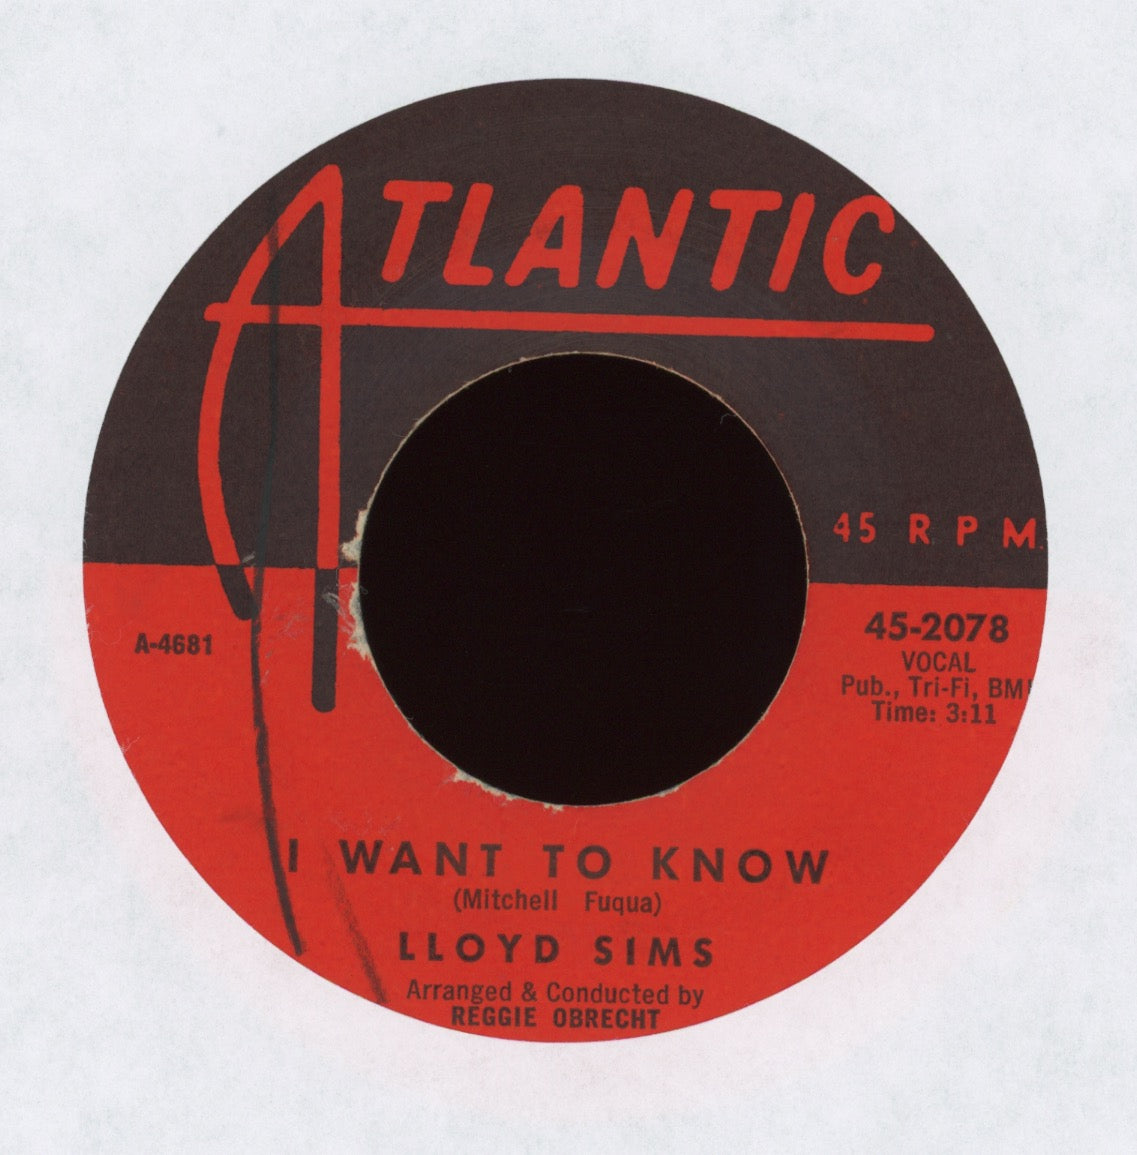 Lloyd Sims - I Want To Know on Atlantic